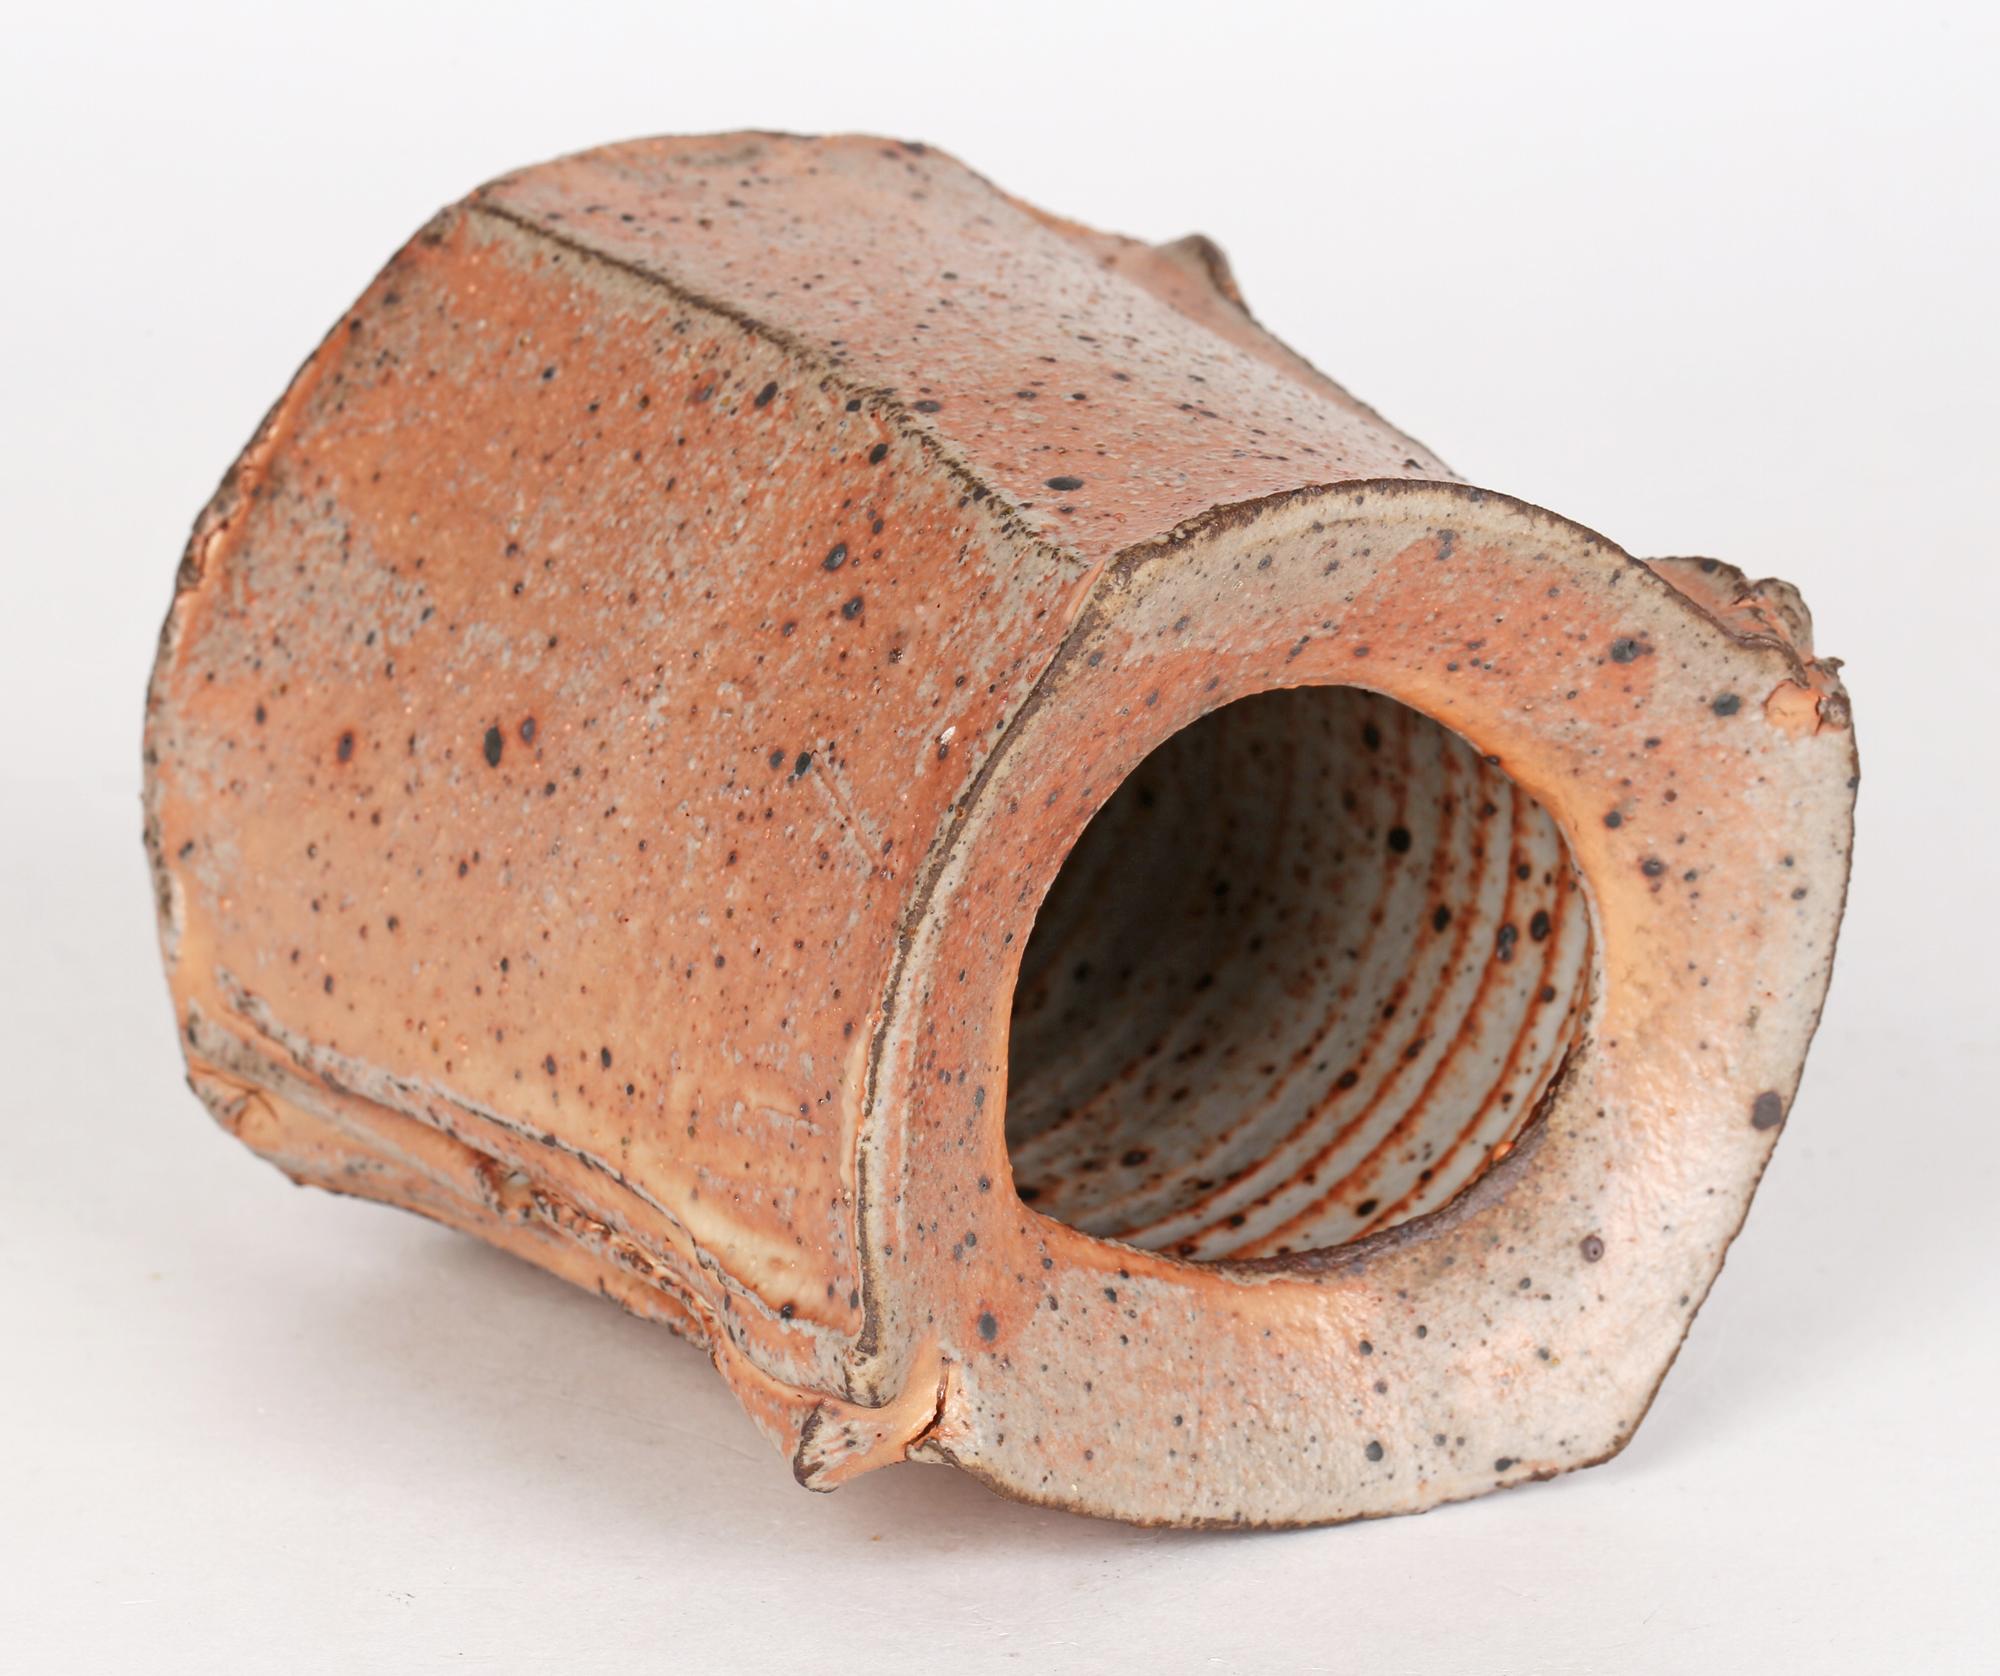 A hand-built squat studio pottery vase of slight tapering rhombic form in matte pink glazes by Katerina Evangelidou (Greek, c.1960). The four sided vase has two erupting vertical seams at two corners with a rounded opening below a concave lip. The